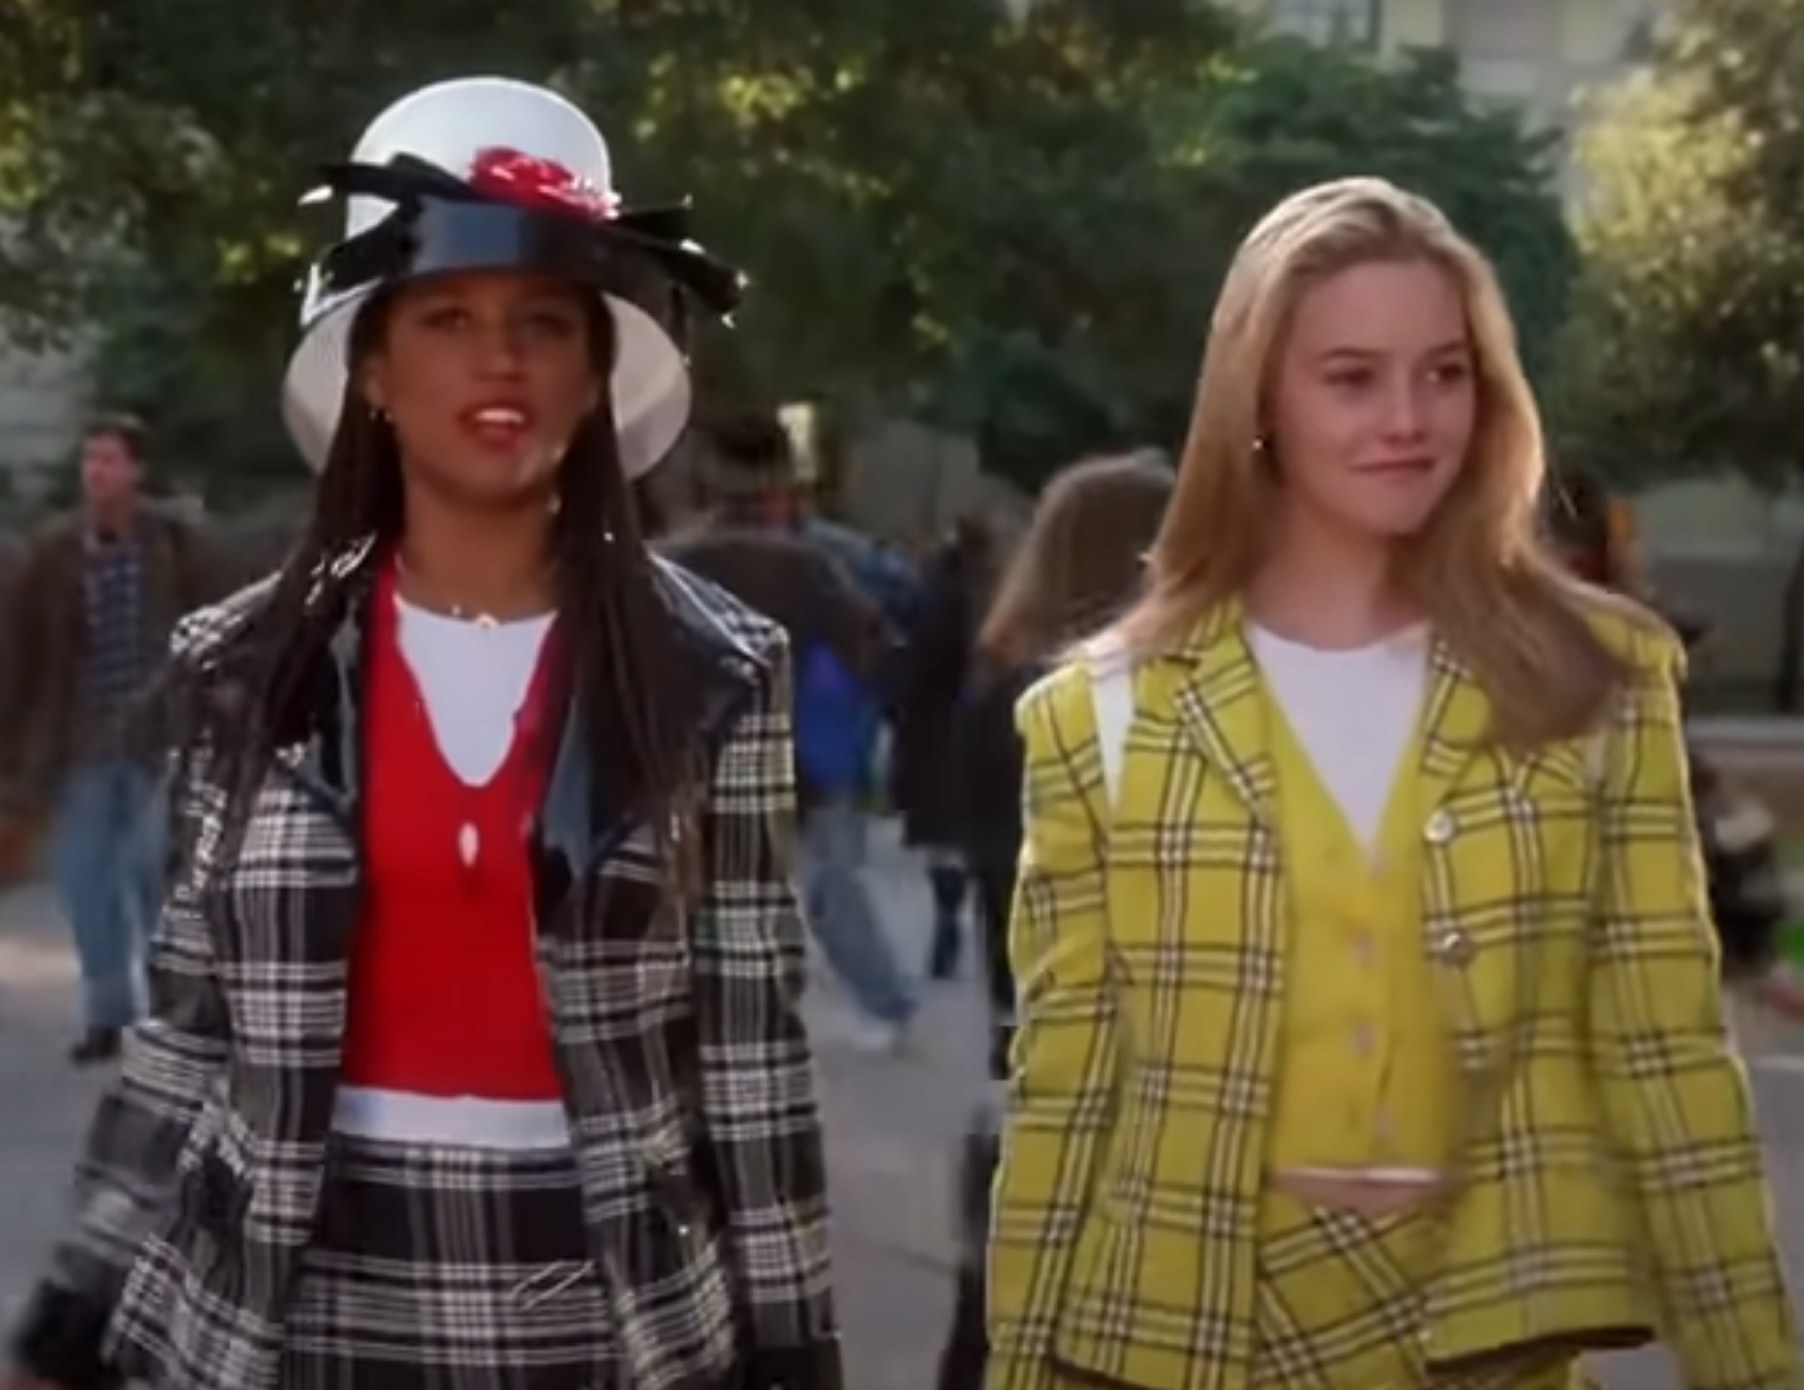 Dionne and Cher strut outside of their school in plaid co-ord outfits